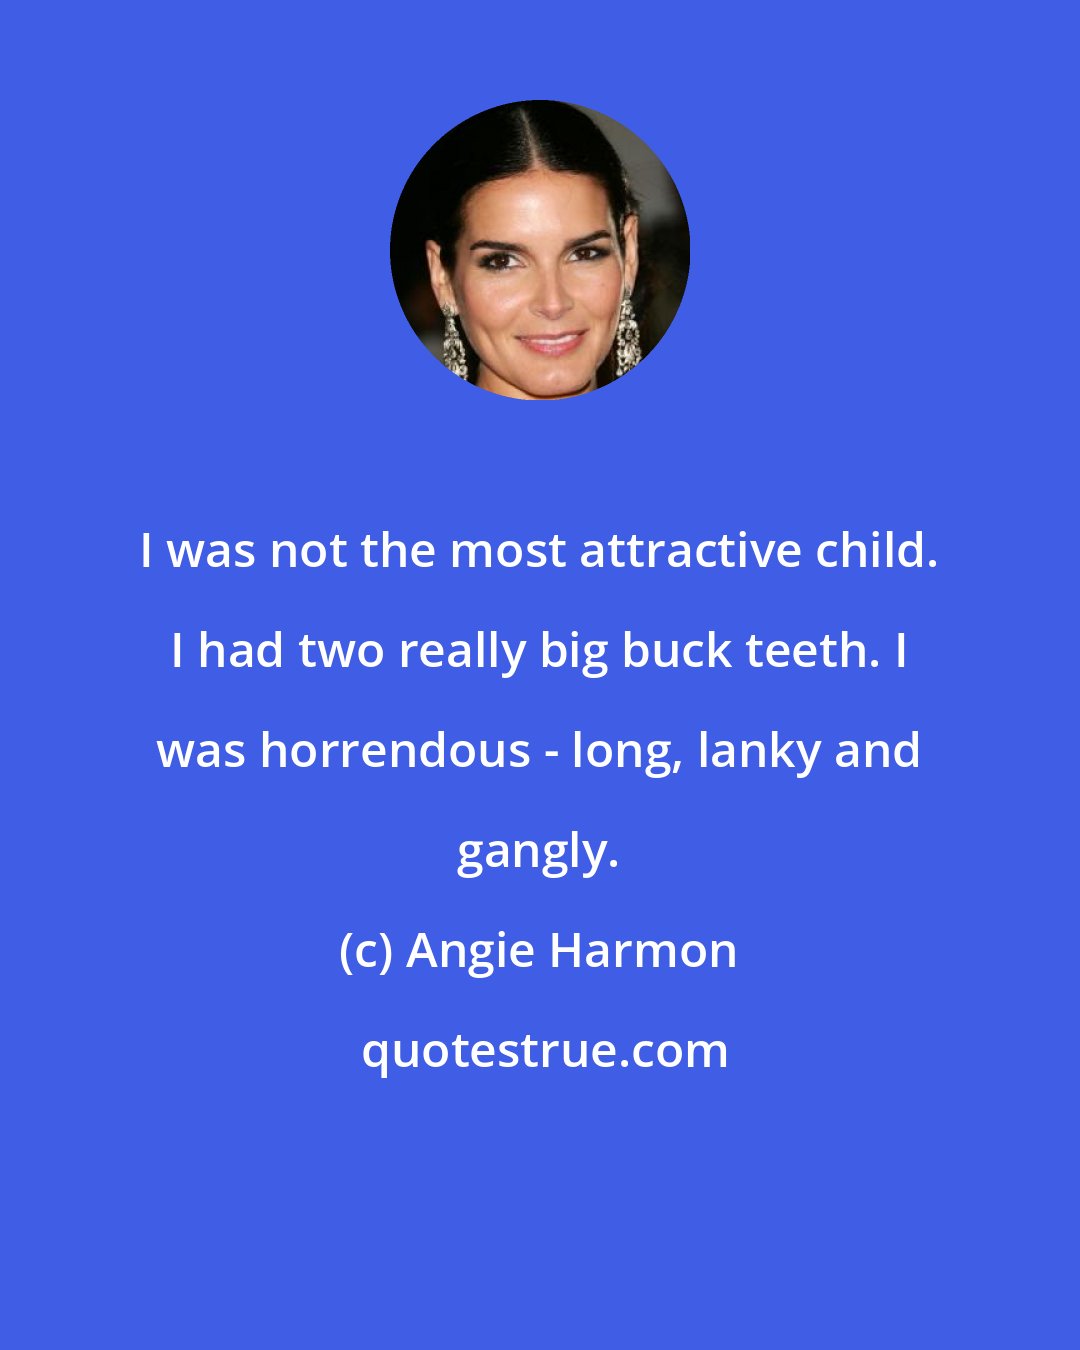 Angie Harmon: I was not the most attractive child. I had two really big buck teeth. I was horrendous - long, lanky and gangly.